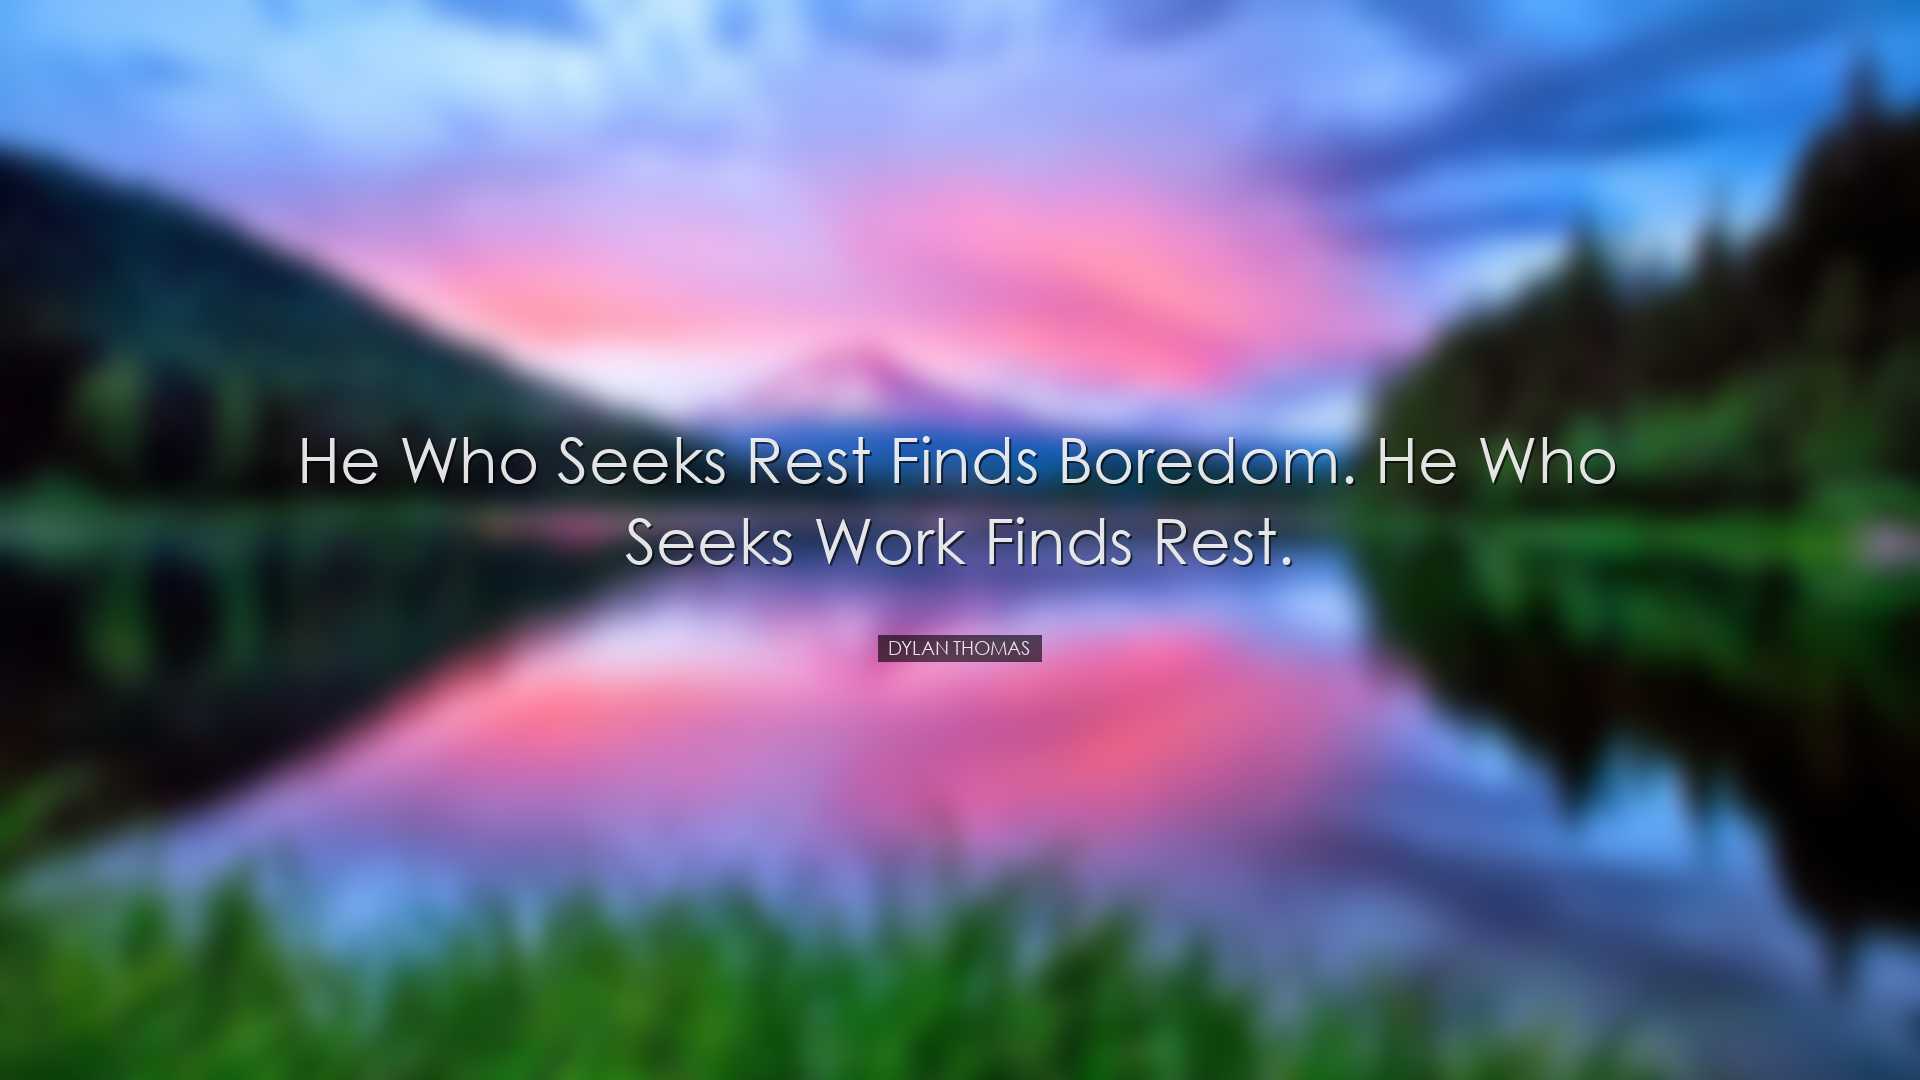 He who seeks rest finds boredom. He who seeks work finds rest. - D